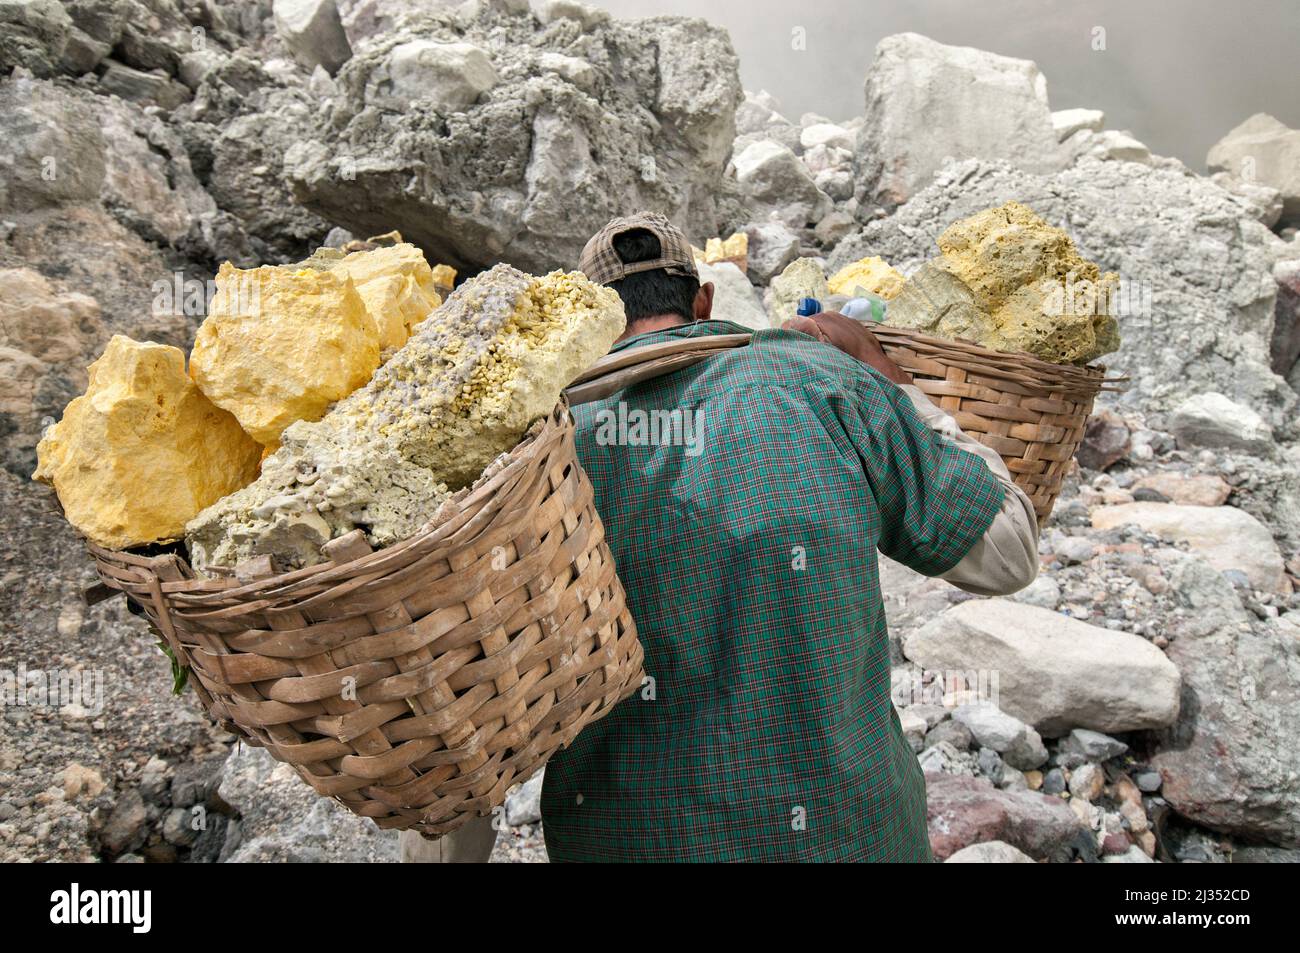 Miner carrying heavy baskets with sulfur from the crater of Ijen volcano, Java Island, Indonesia Stock Photo